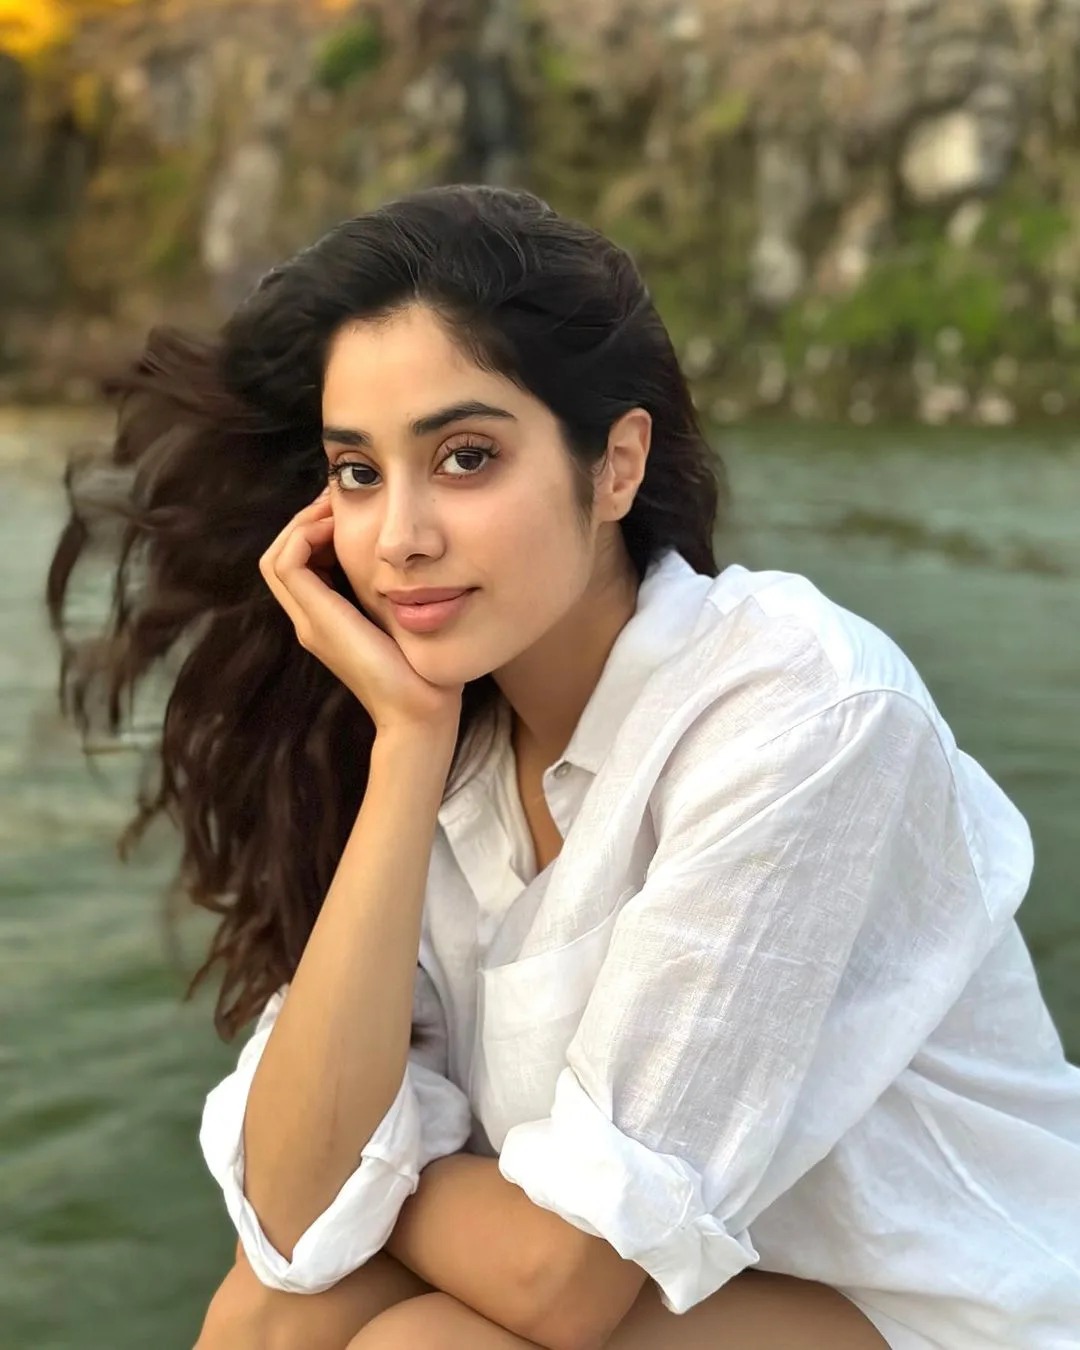 Janhvi Kapoor takes aims at youth with the sexy Instagram photos